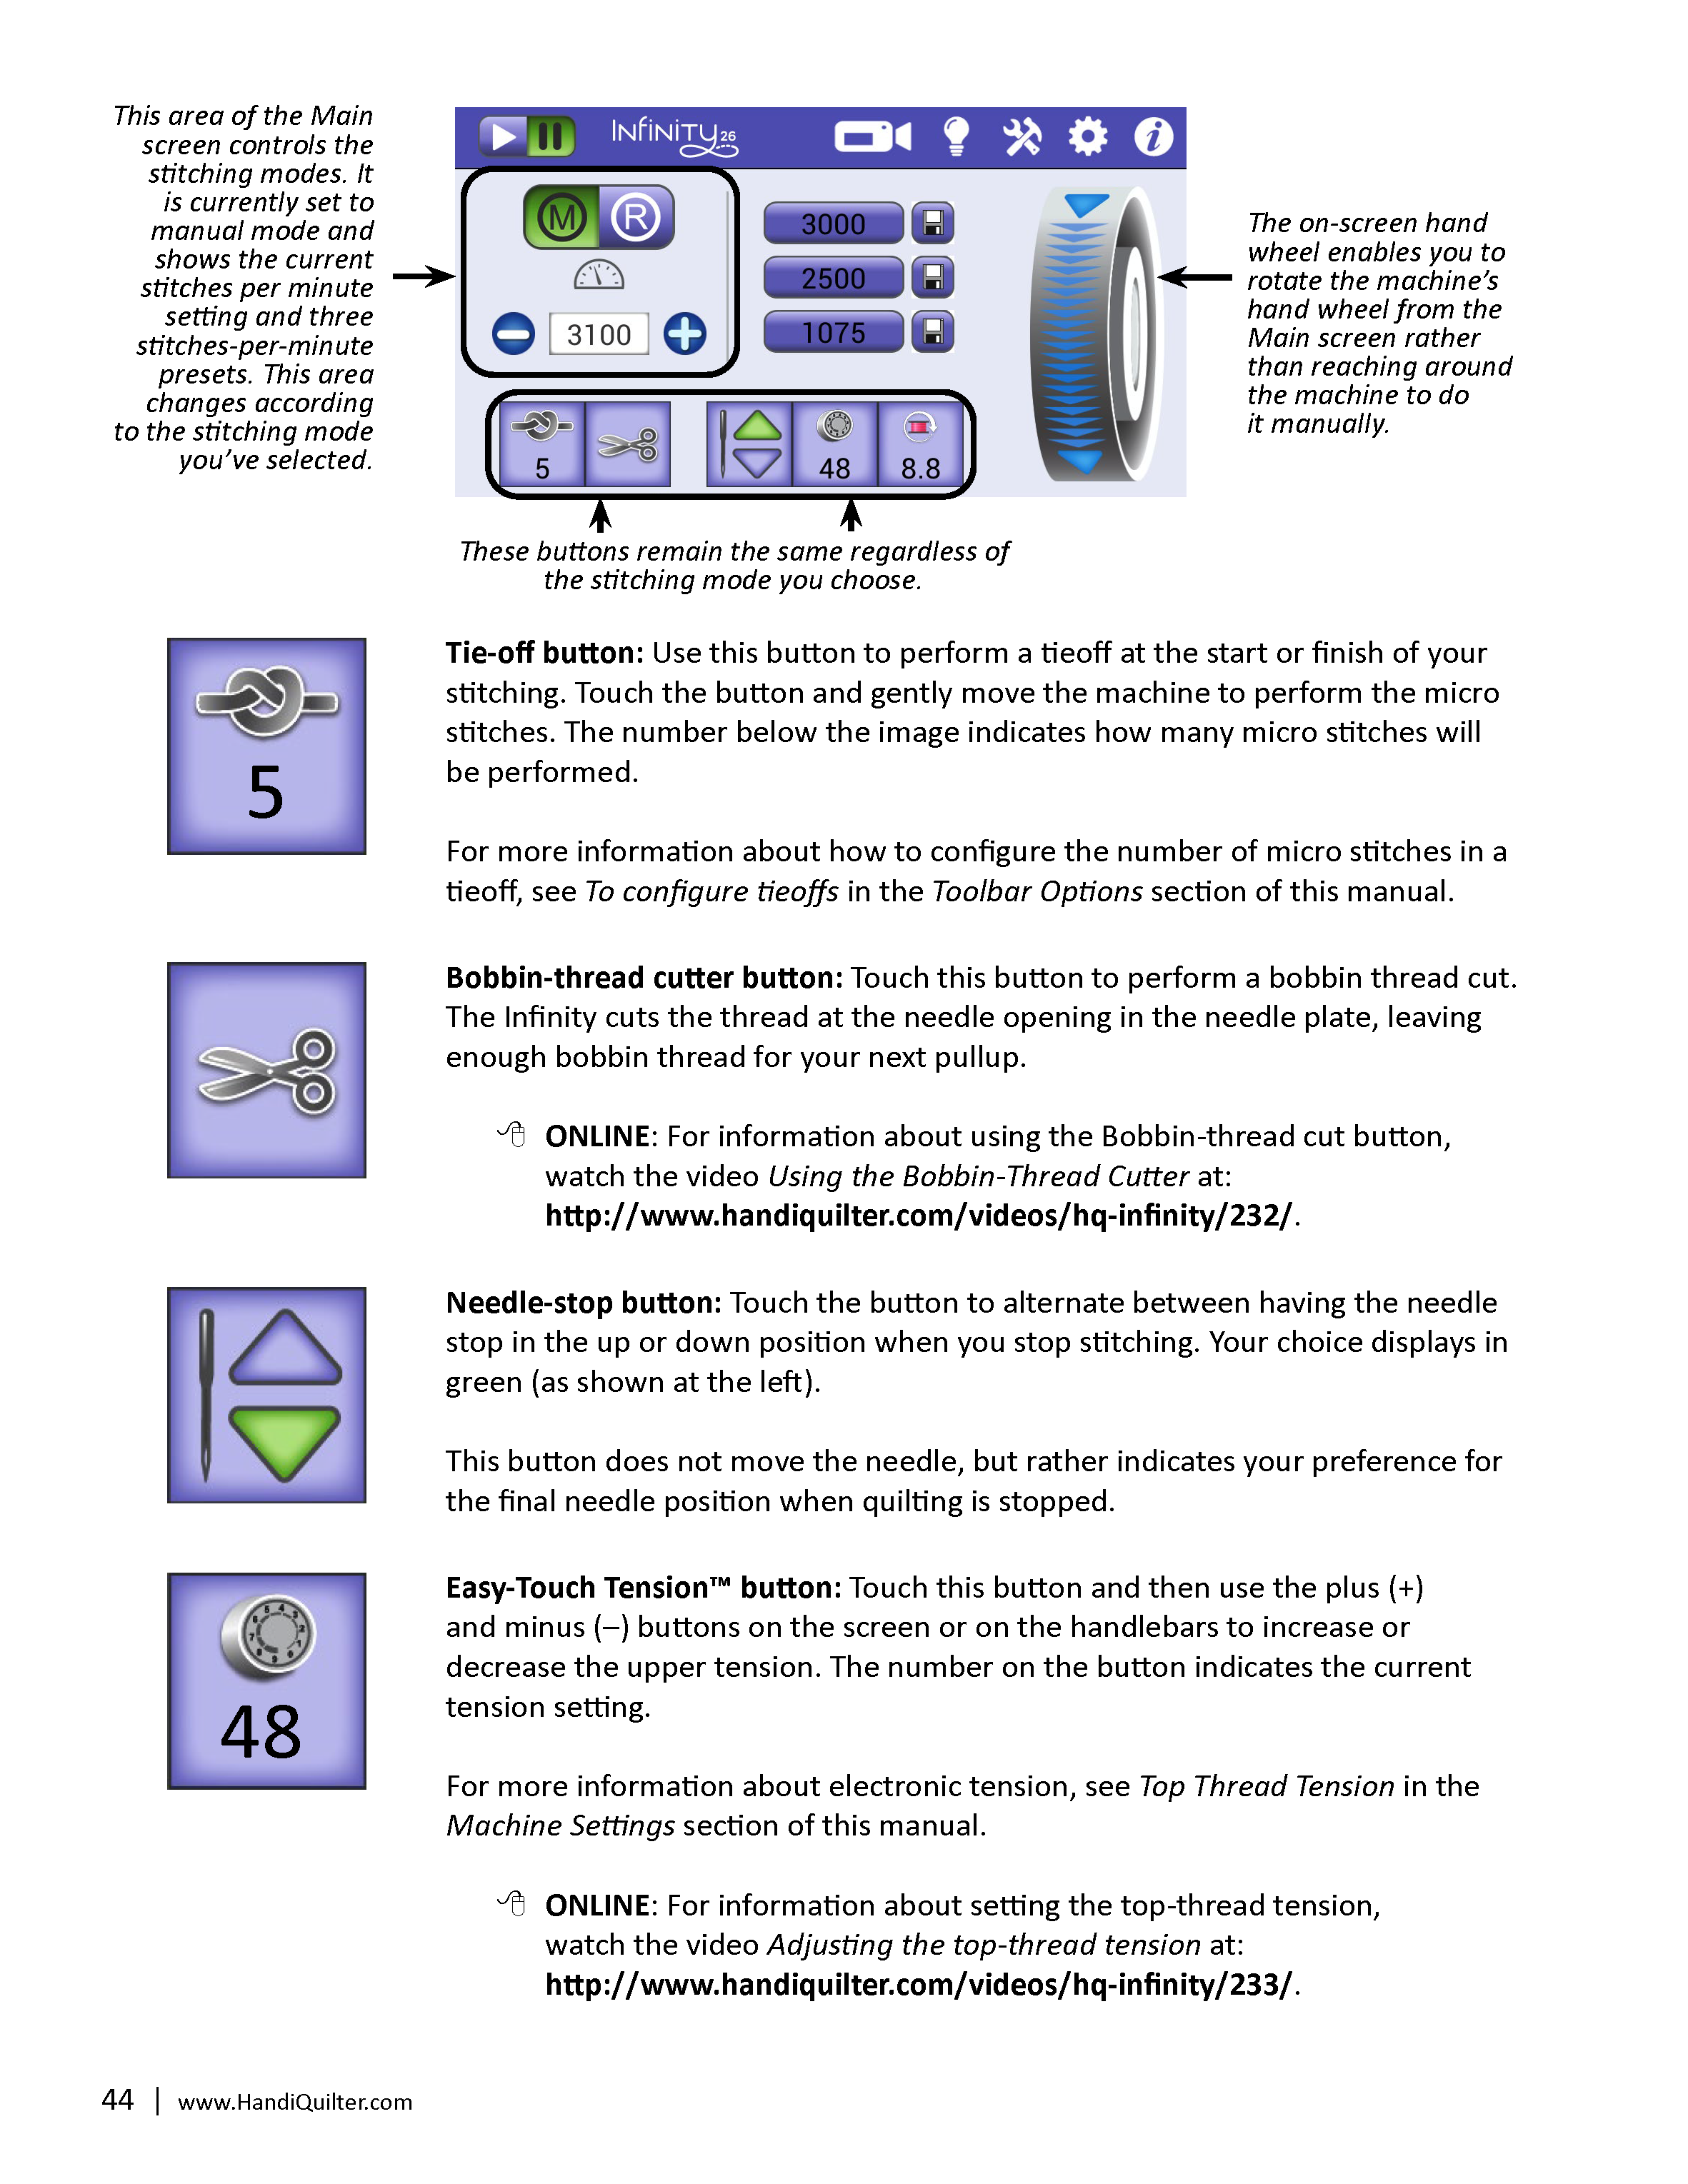 QM33001-HQ-Infinity-User-manual-version-1.4-ALL-Web-1_Page_45.png